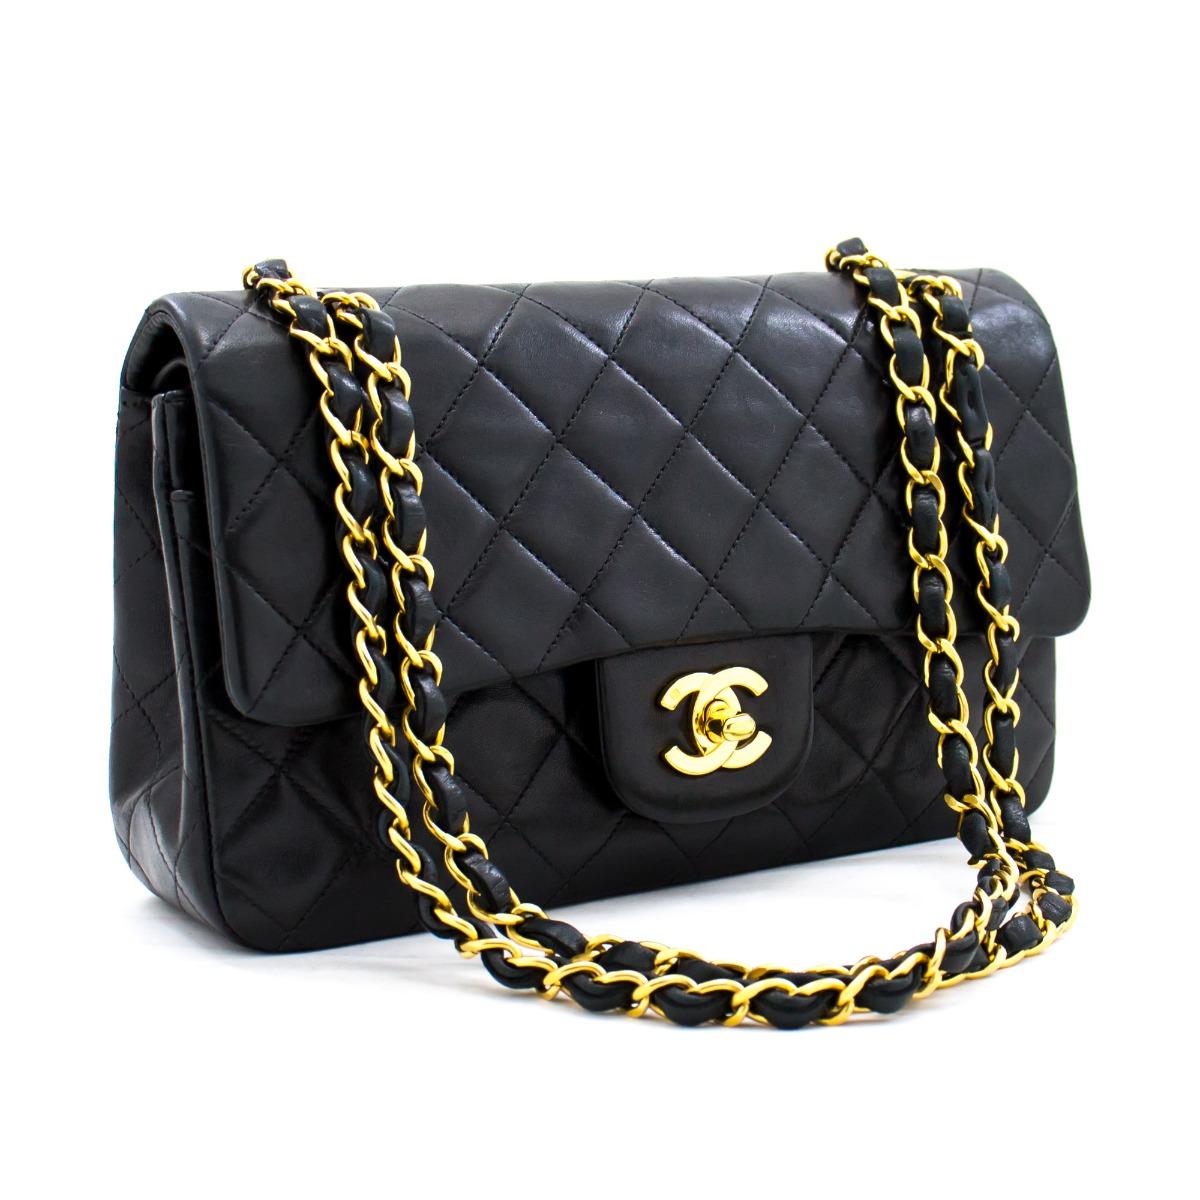 This pre-owned classic Chanel 9 inch double flap bag from 1996-1997 has been crafted from diamond-quilted lambskin with a double flap closure. The front flap features the Maisons signature CC logo on a twist-lock finished with refined gold-tone